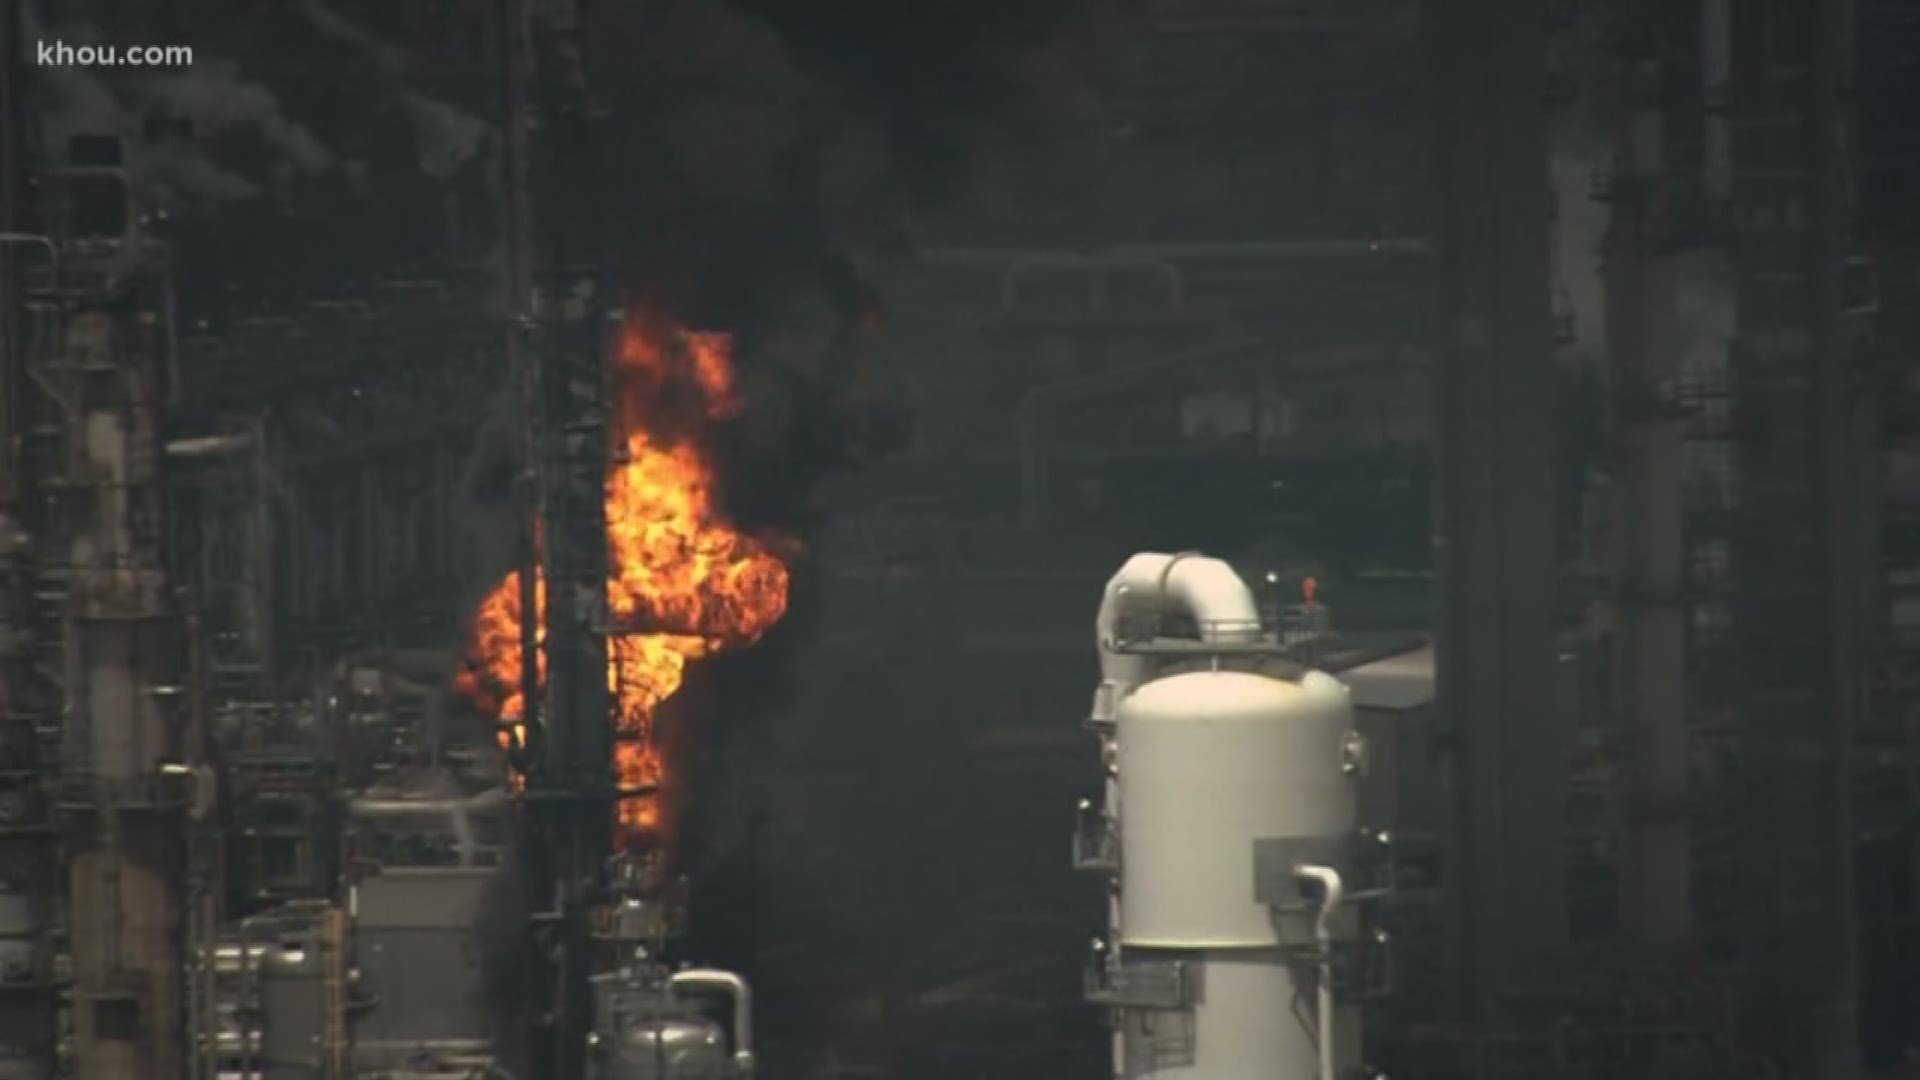 A unit at the ExxonMobil plant in Baytown exploded Wednesday injuring more than 30 people. KHOU 11 Investigates learned the plant has been flagged for a number of violations dating back to the 90s.